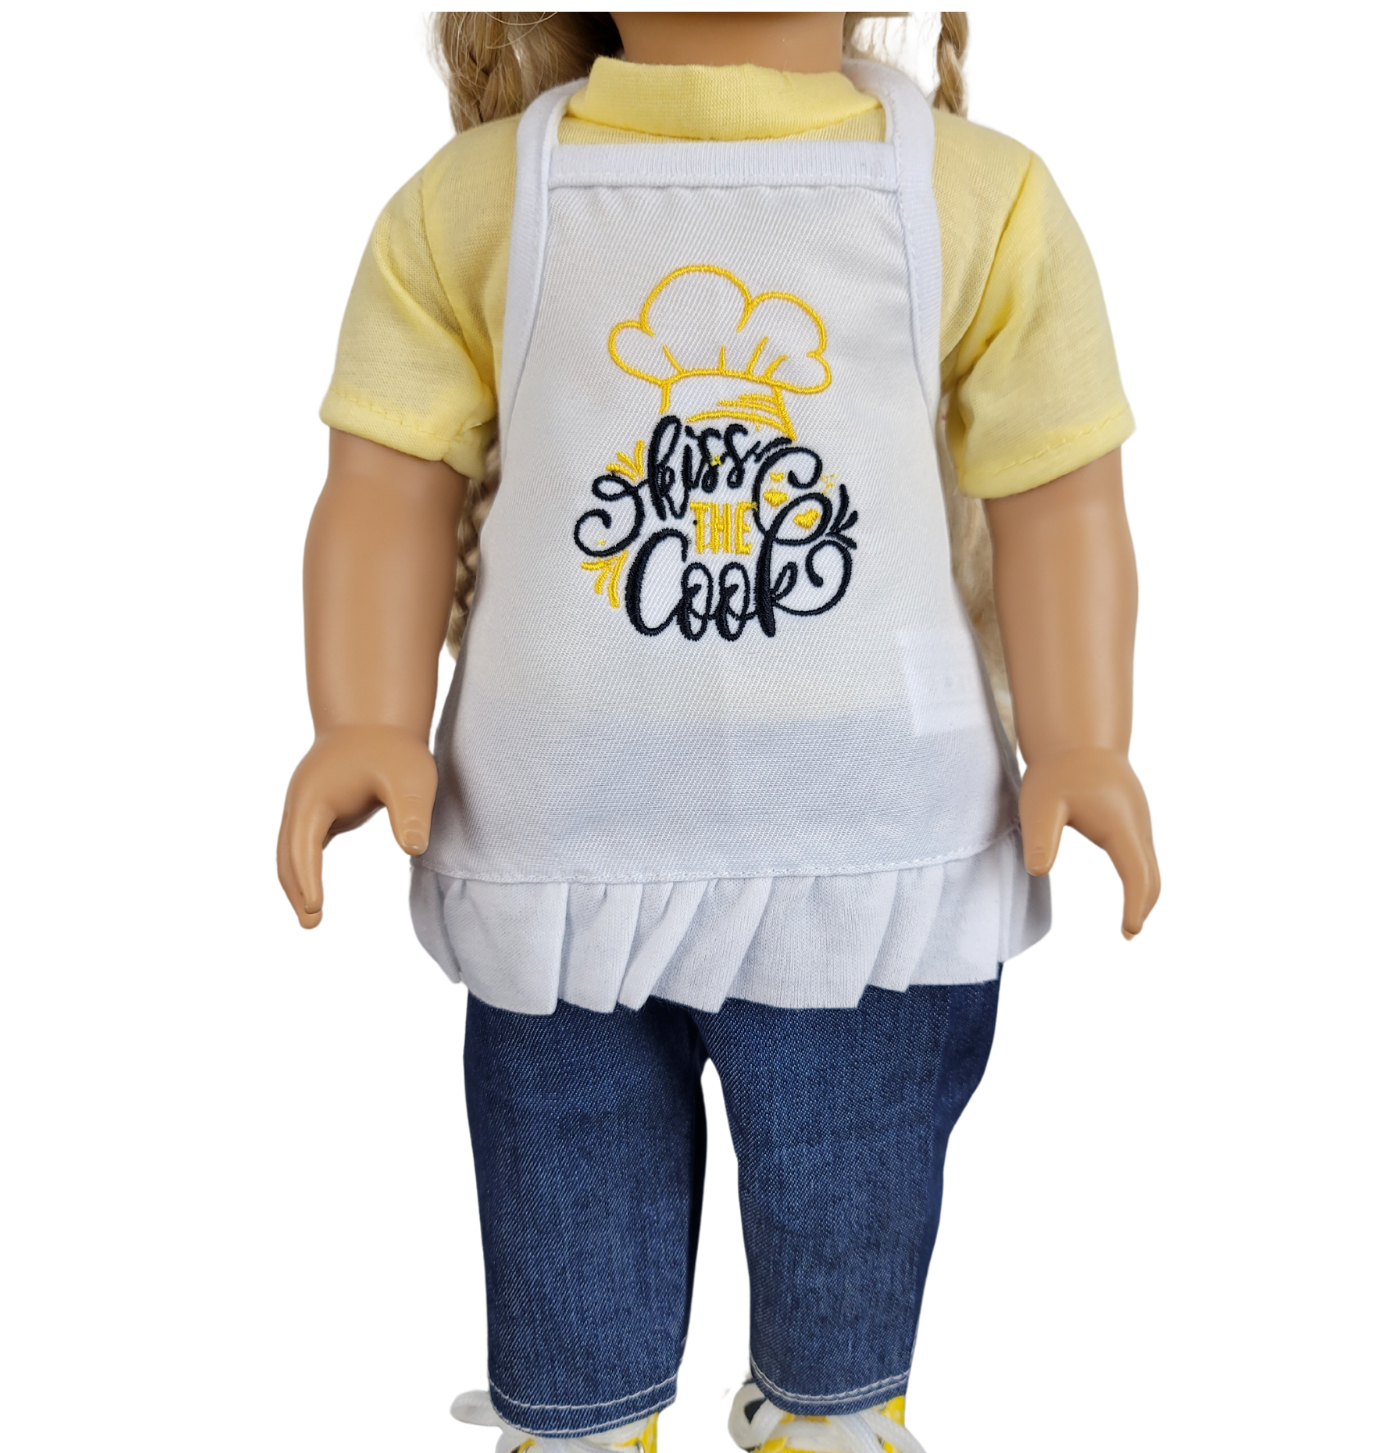 Doll Clothes Apron Outfit Kitchen Chef Kiss the Cook Gift fits 18" American Girl - $16.81